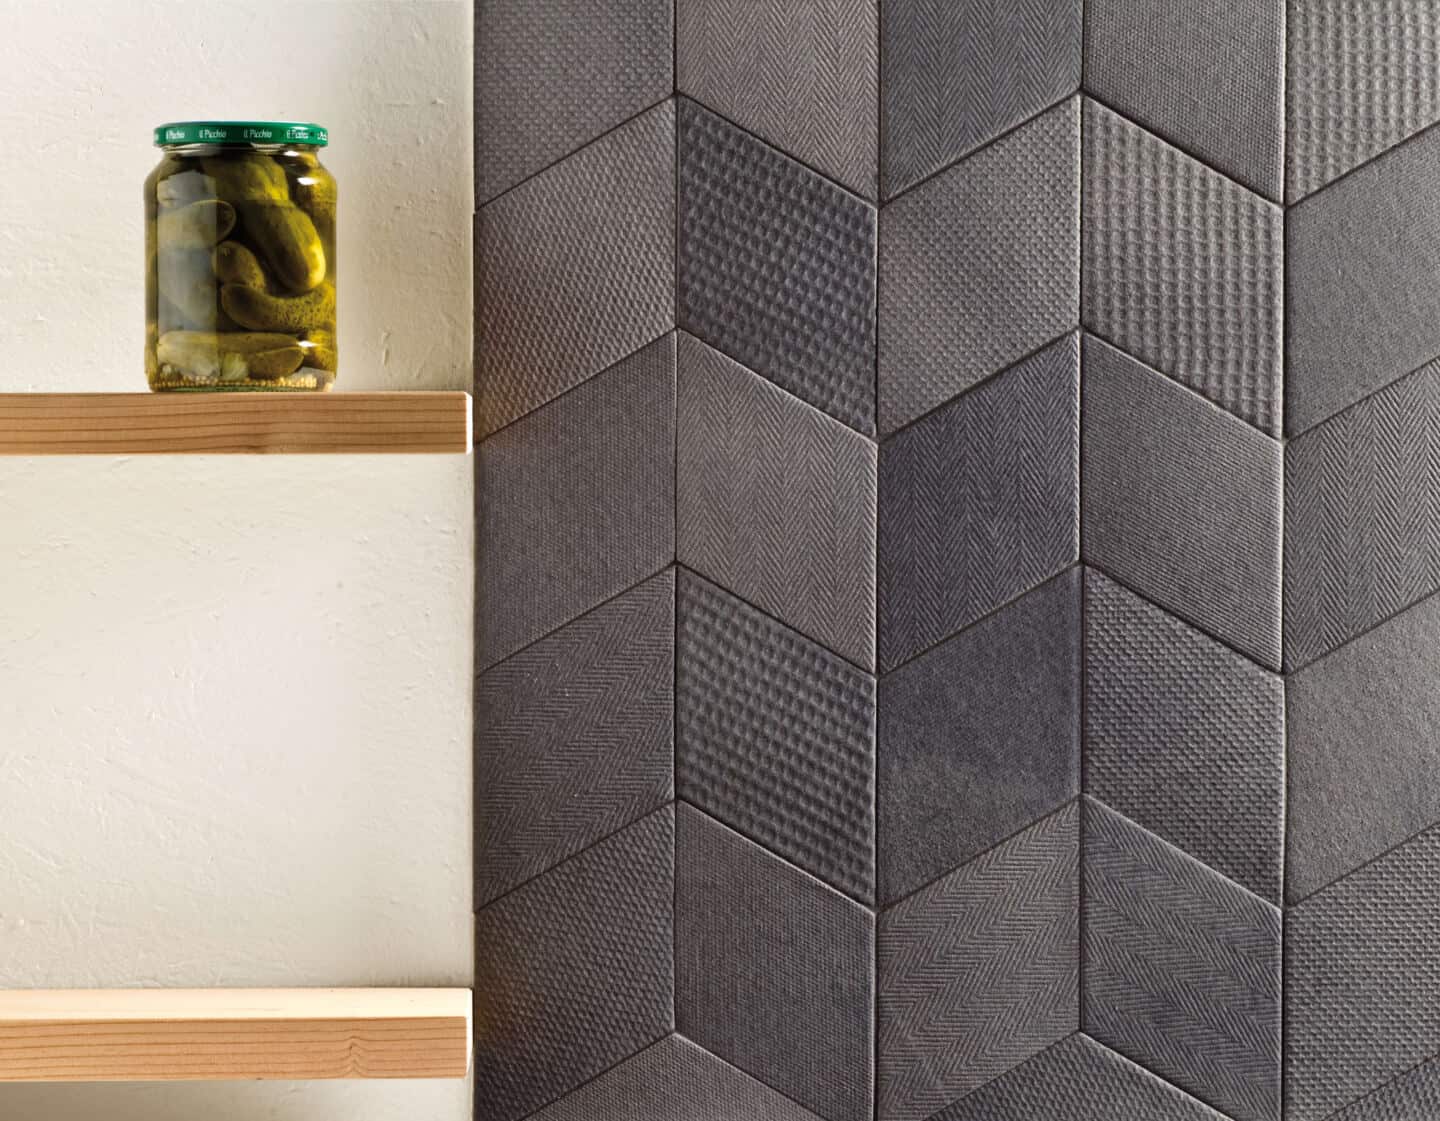 Black textured wall tiles next to two shelves. A jar of pickles is on one of the shelves.